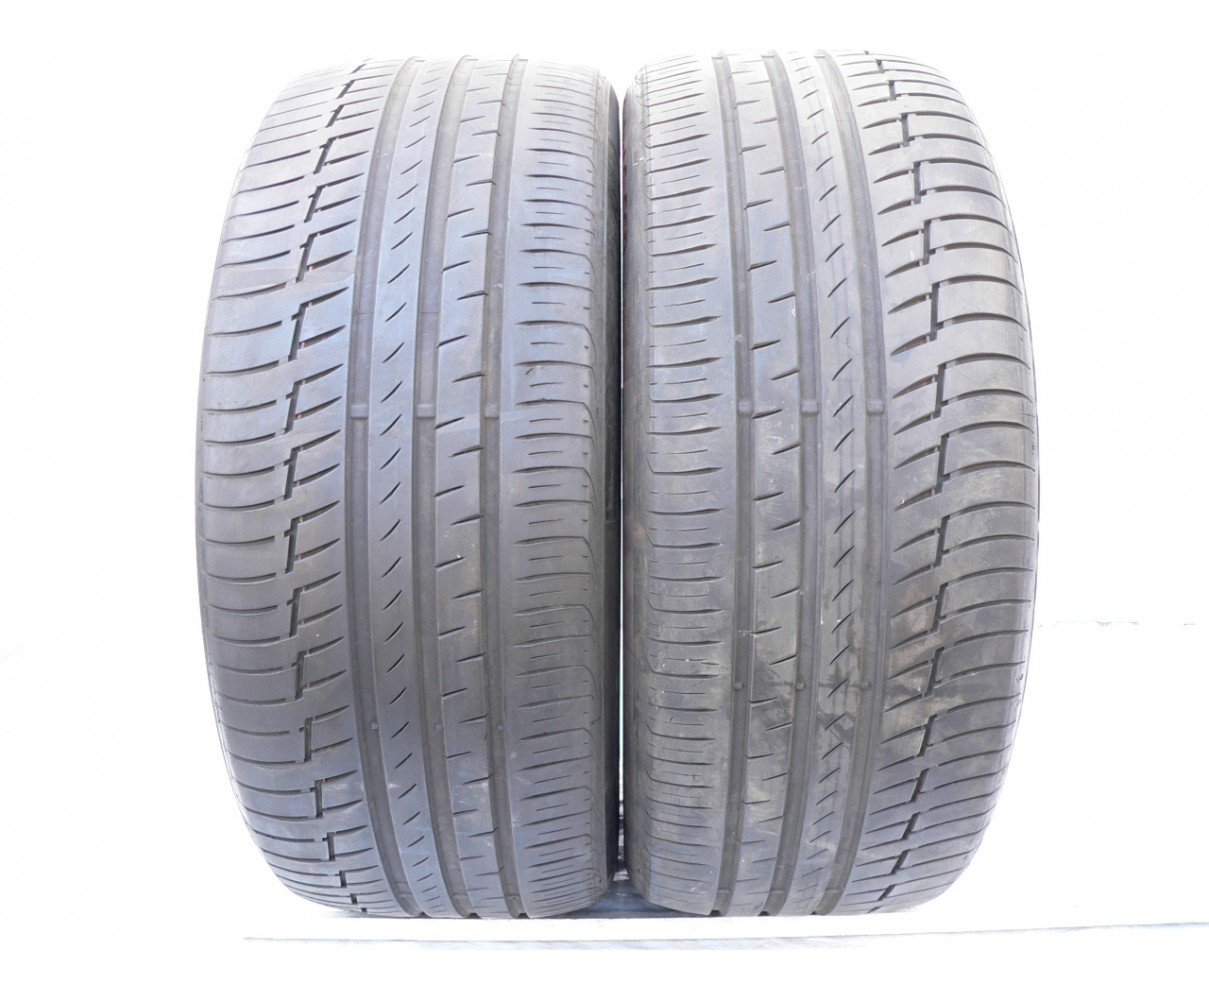 35 tires 6 Continental used PremiumContact 60% 22 275 104Y 2 life